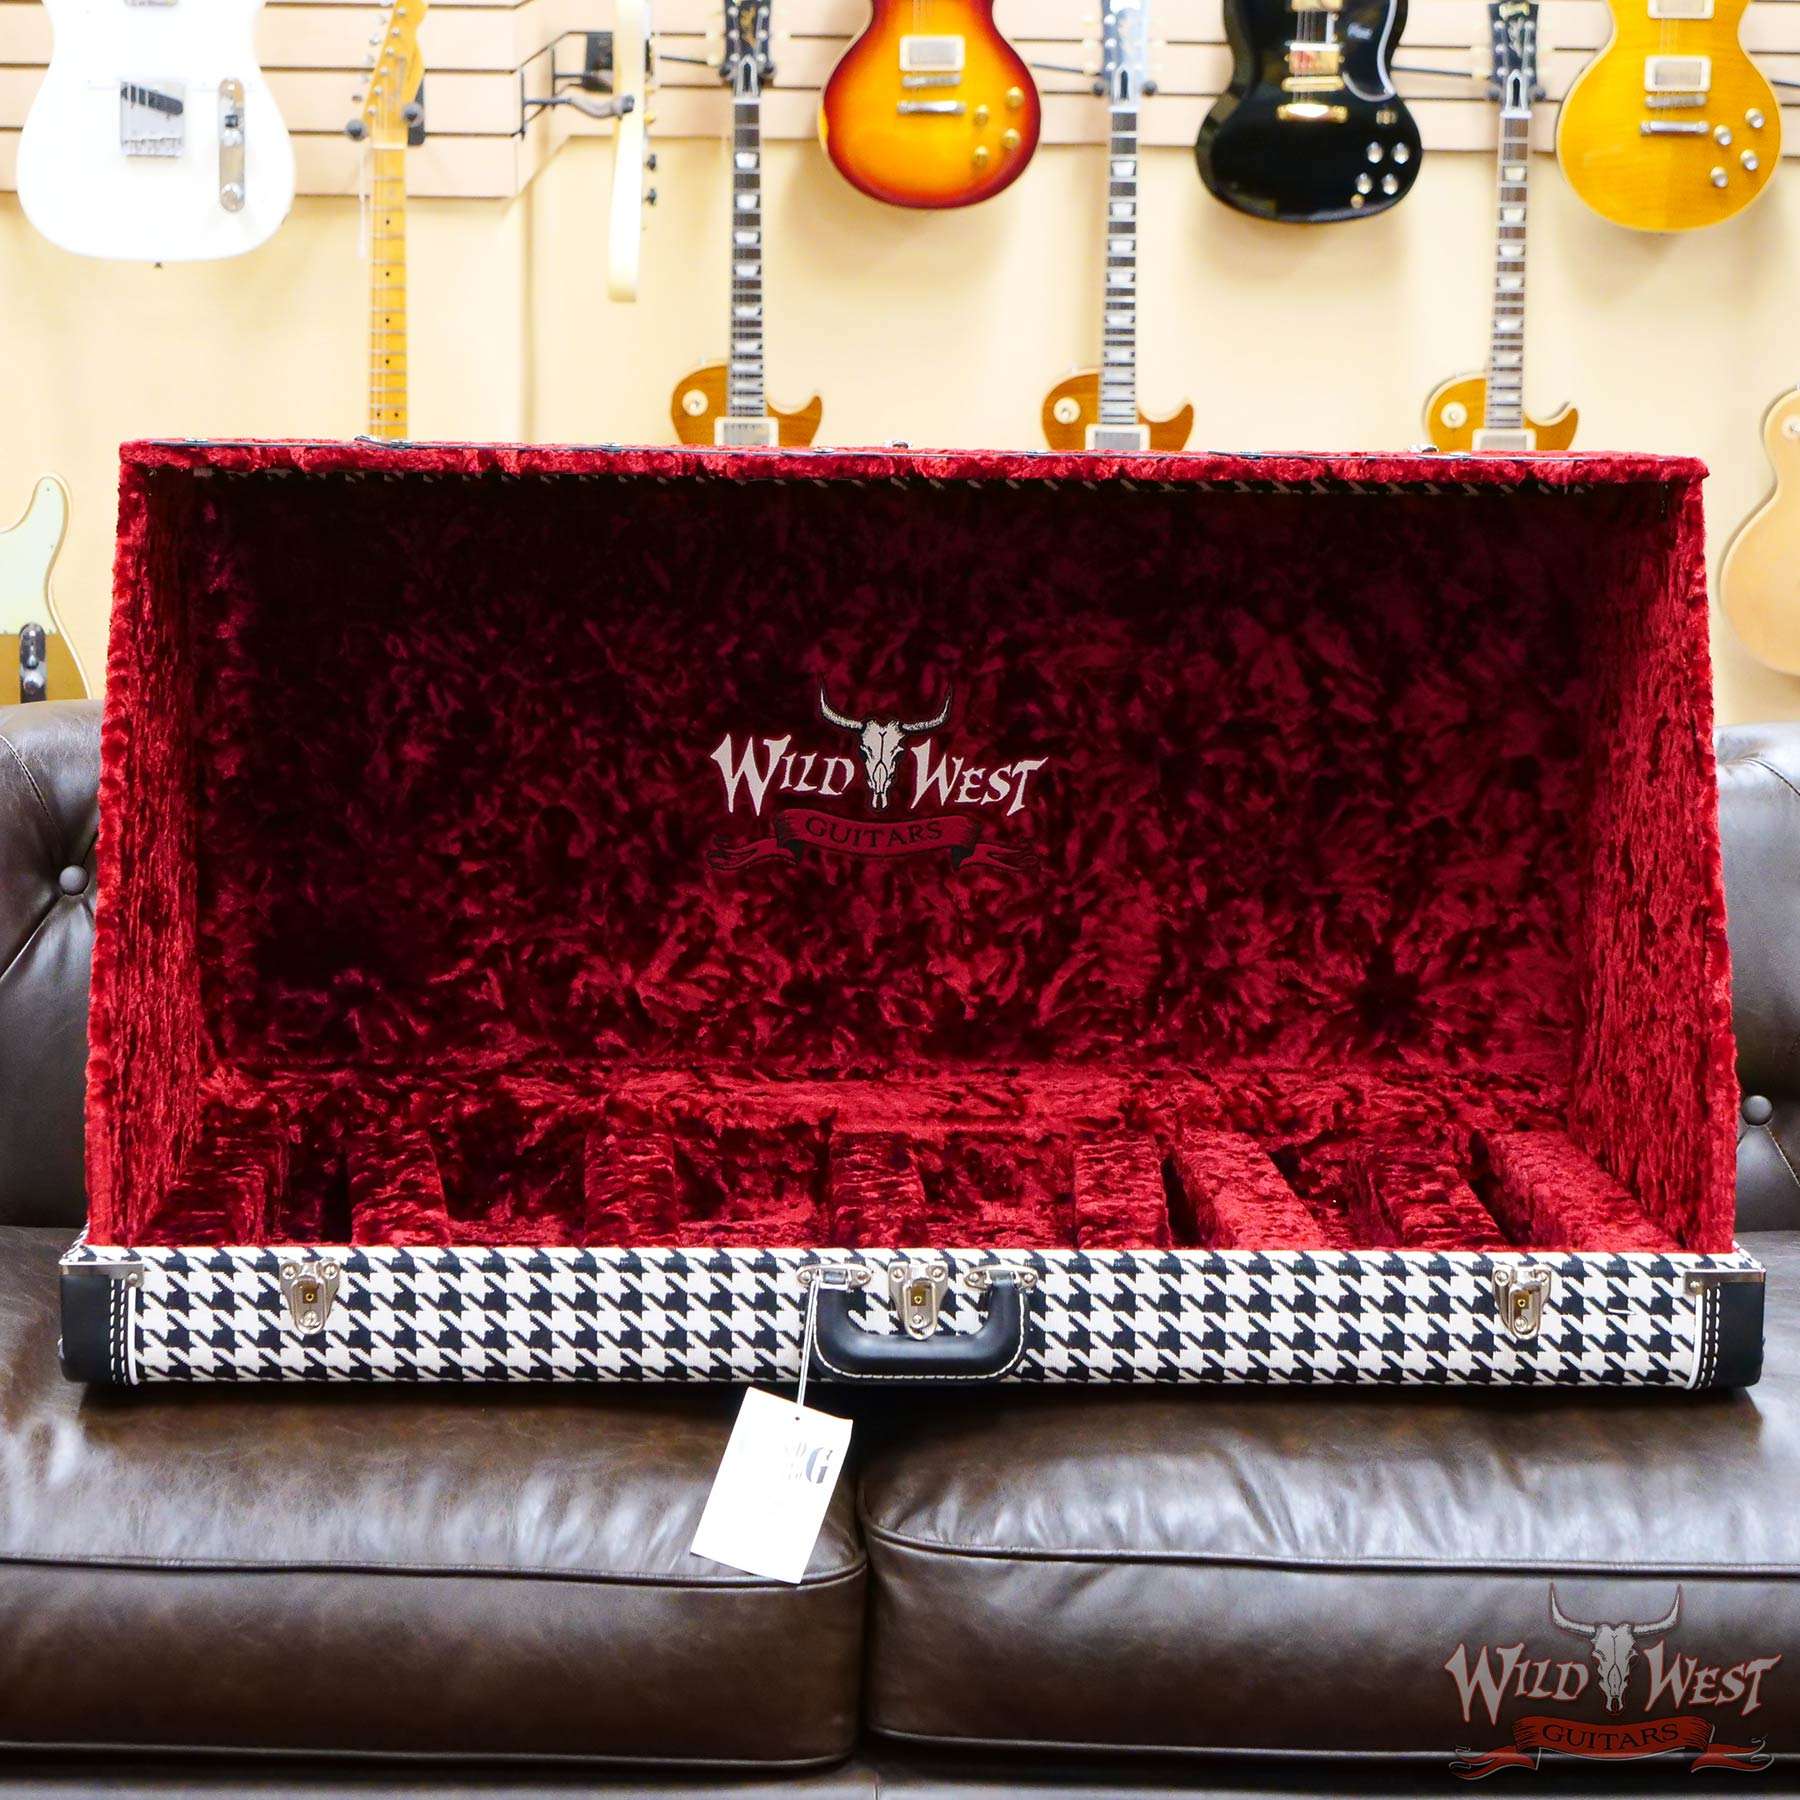 Case　Houndstooth　Wild　Red　West　West　Wild　Stand　Guitar　Guitar　Case　Interior　with　Guitars　GG　Quality